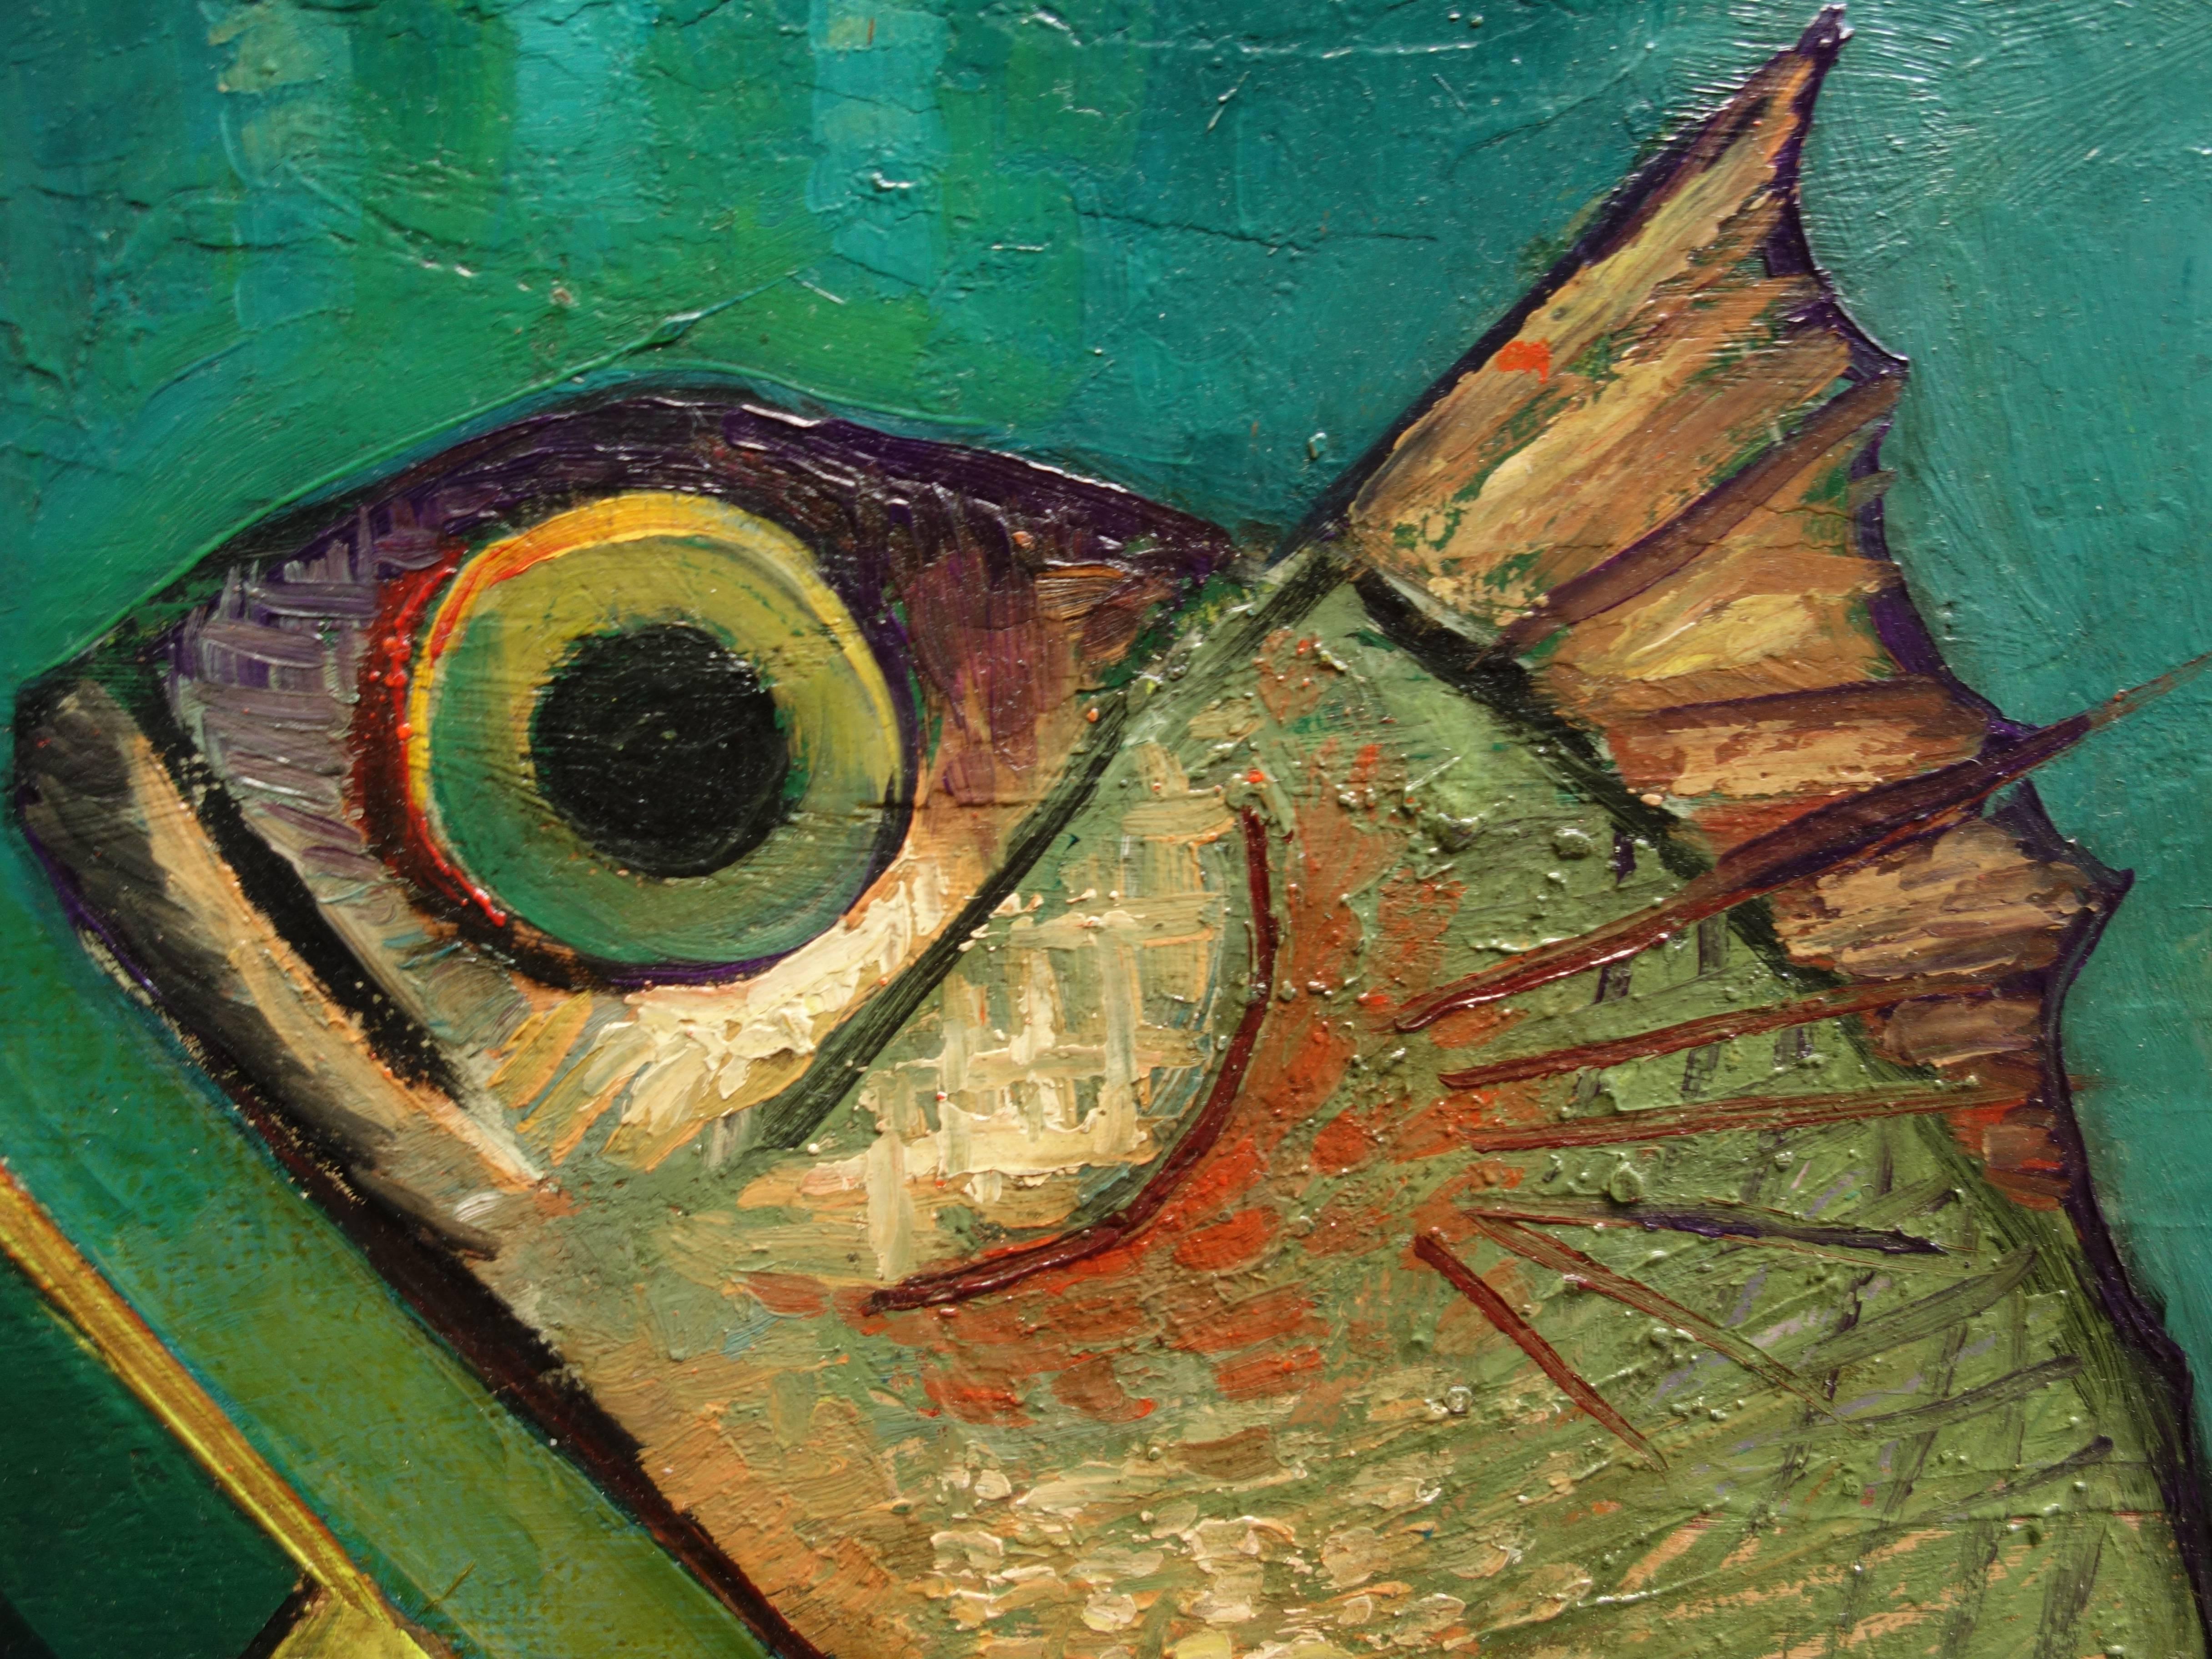 Fish and Bottle - Original oil painting - Signed 1